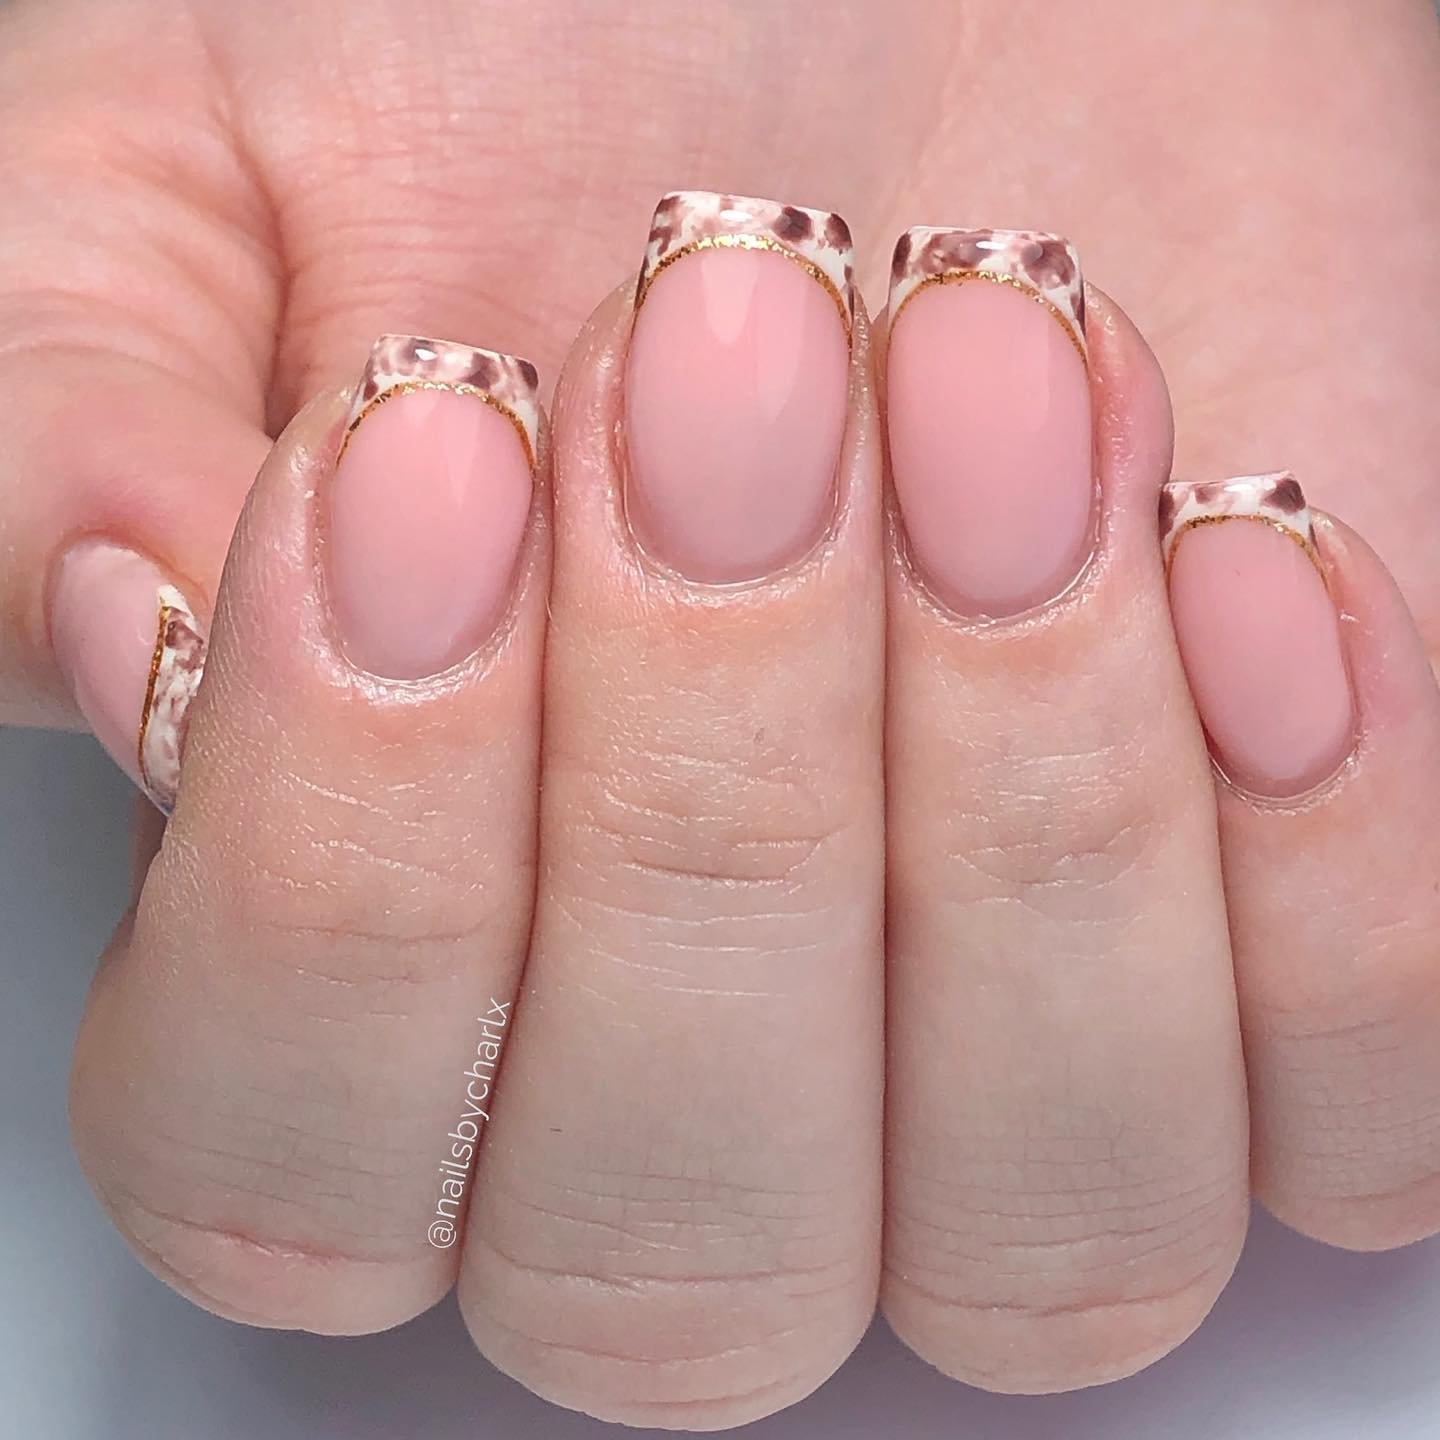 4 - Picture of French Tip Nails